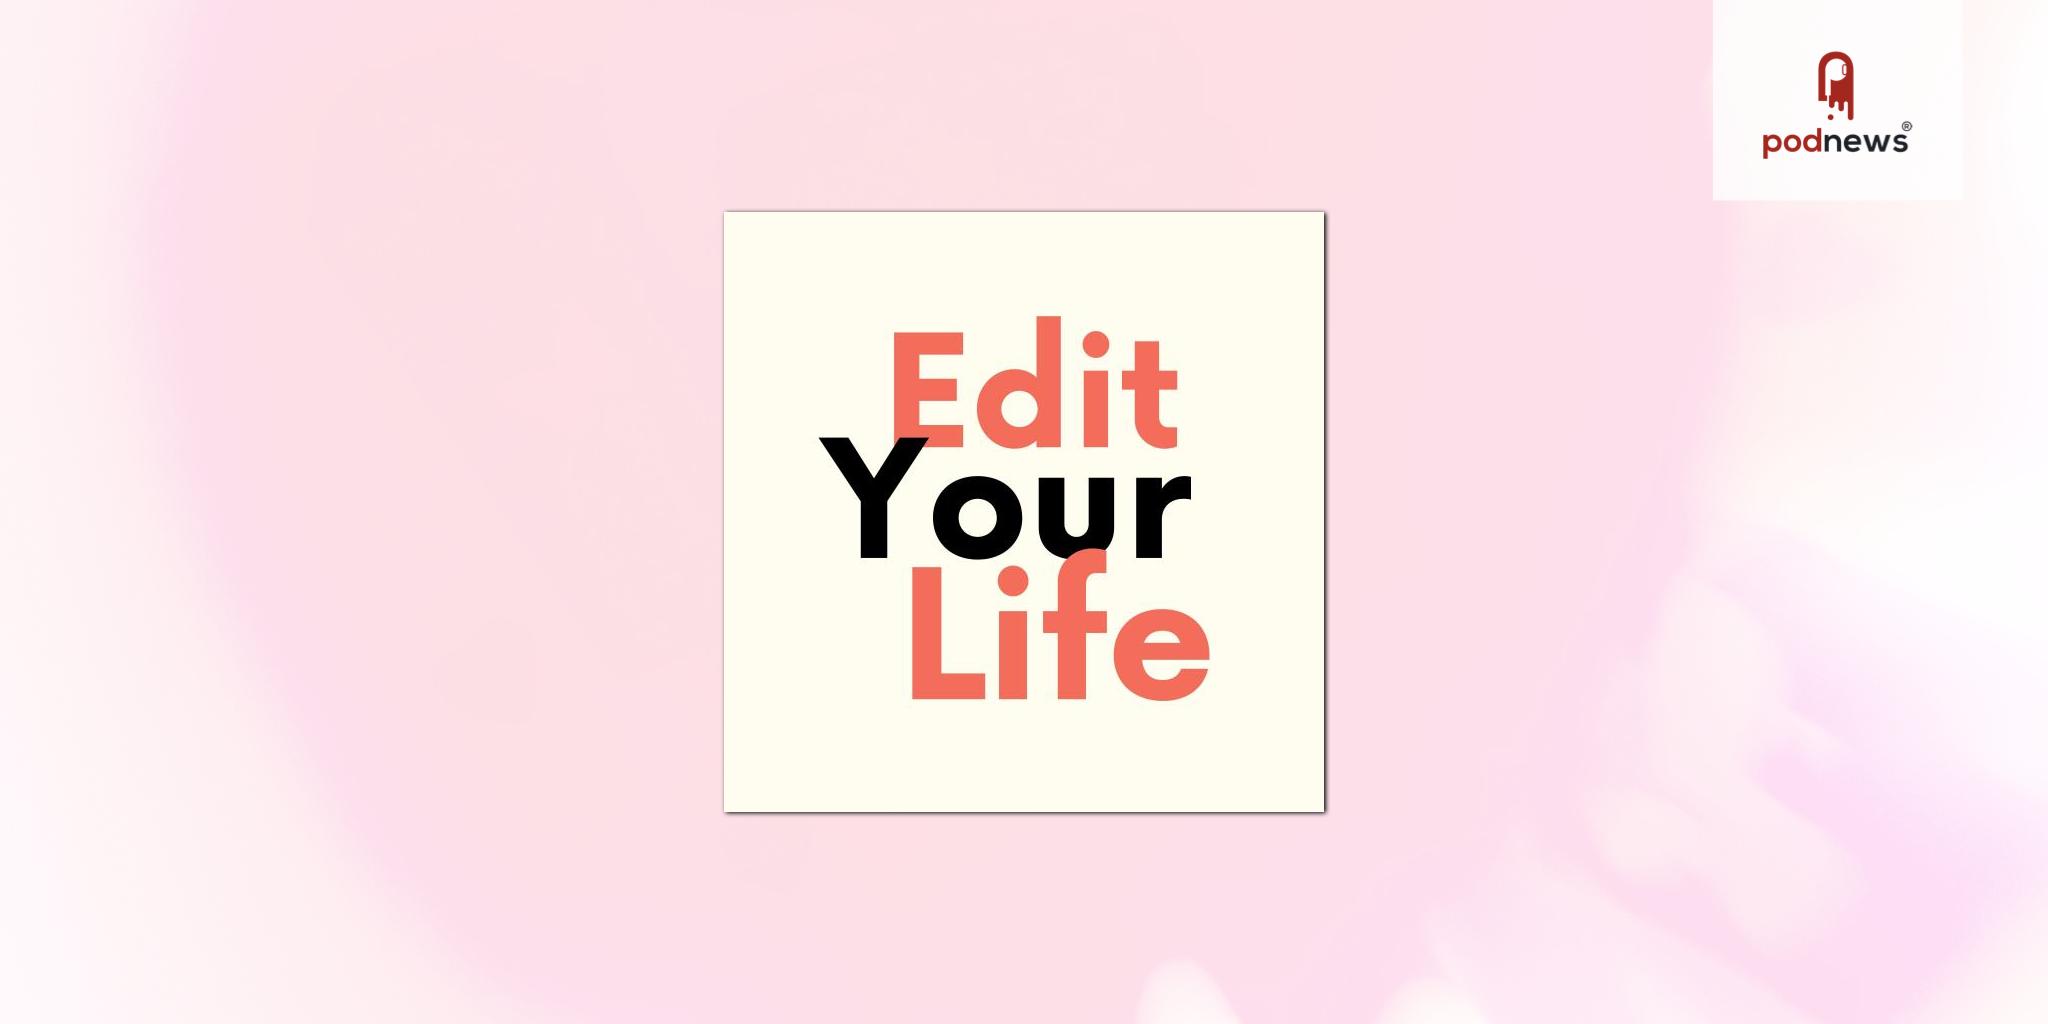 Edit Your Life Joins Adalyst Media’s Podcast Slate